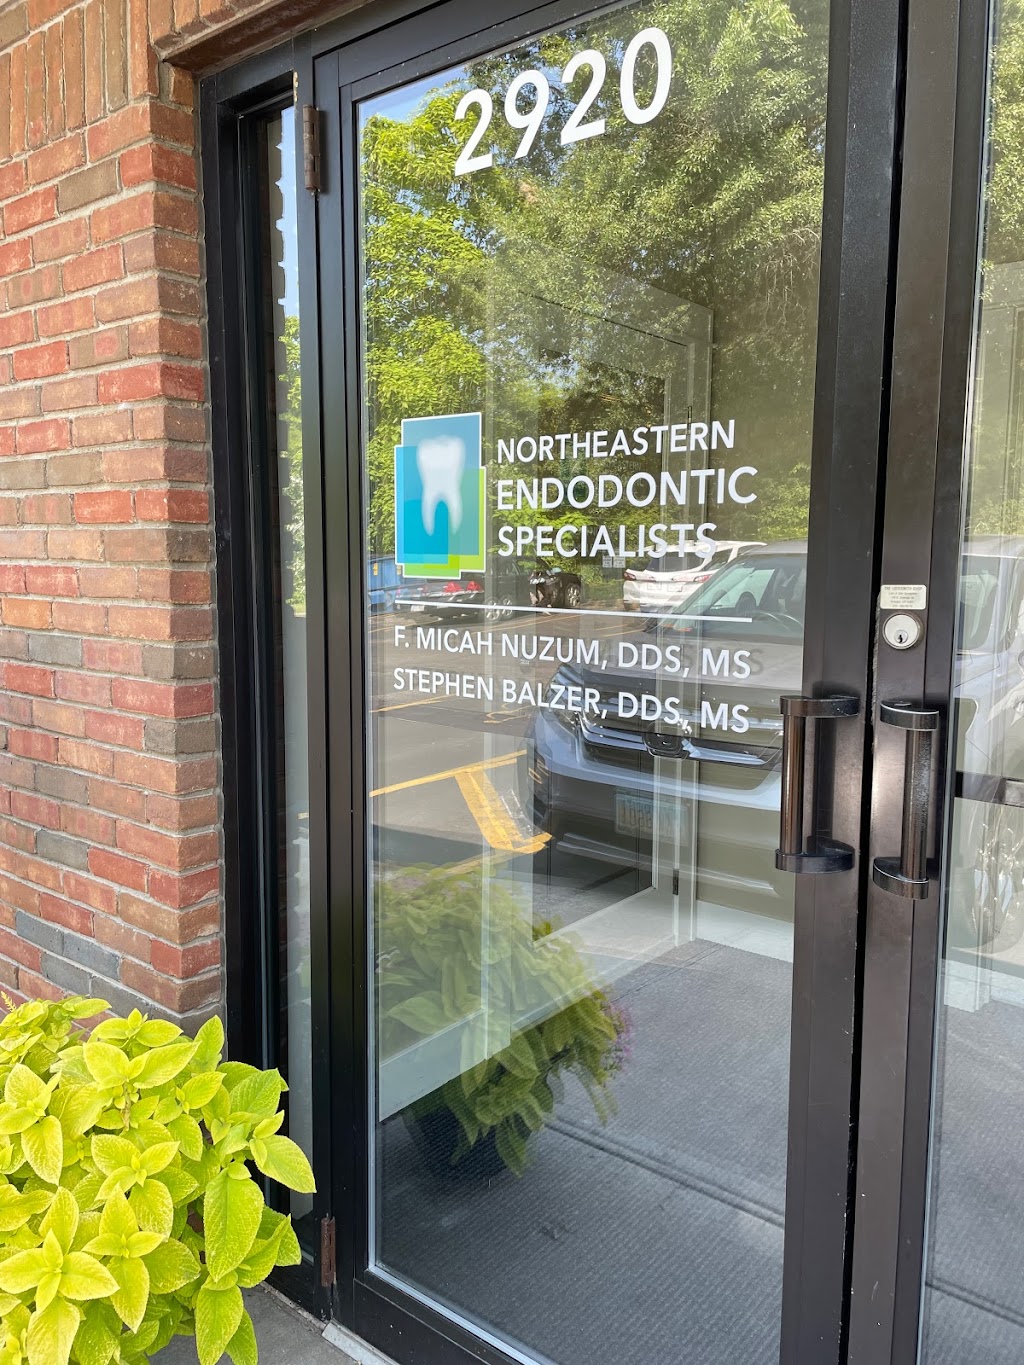 Northeastern Endodontic Specialists | 2920 Cleveland Rd, Wooster, OH 44691 | Phone: (330) 345-1200